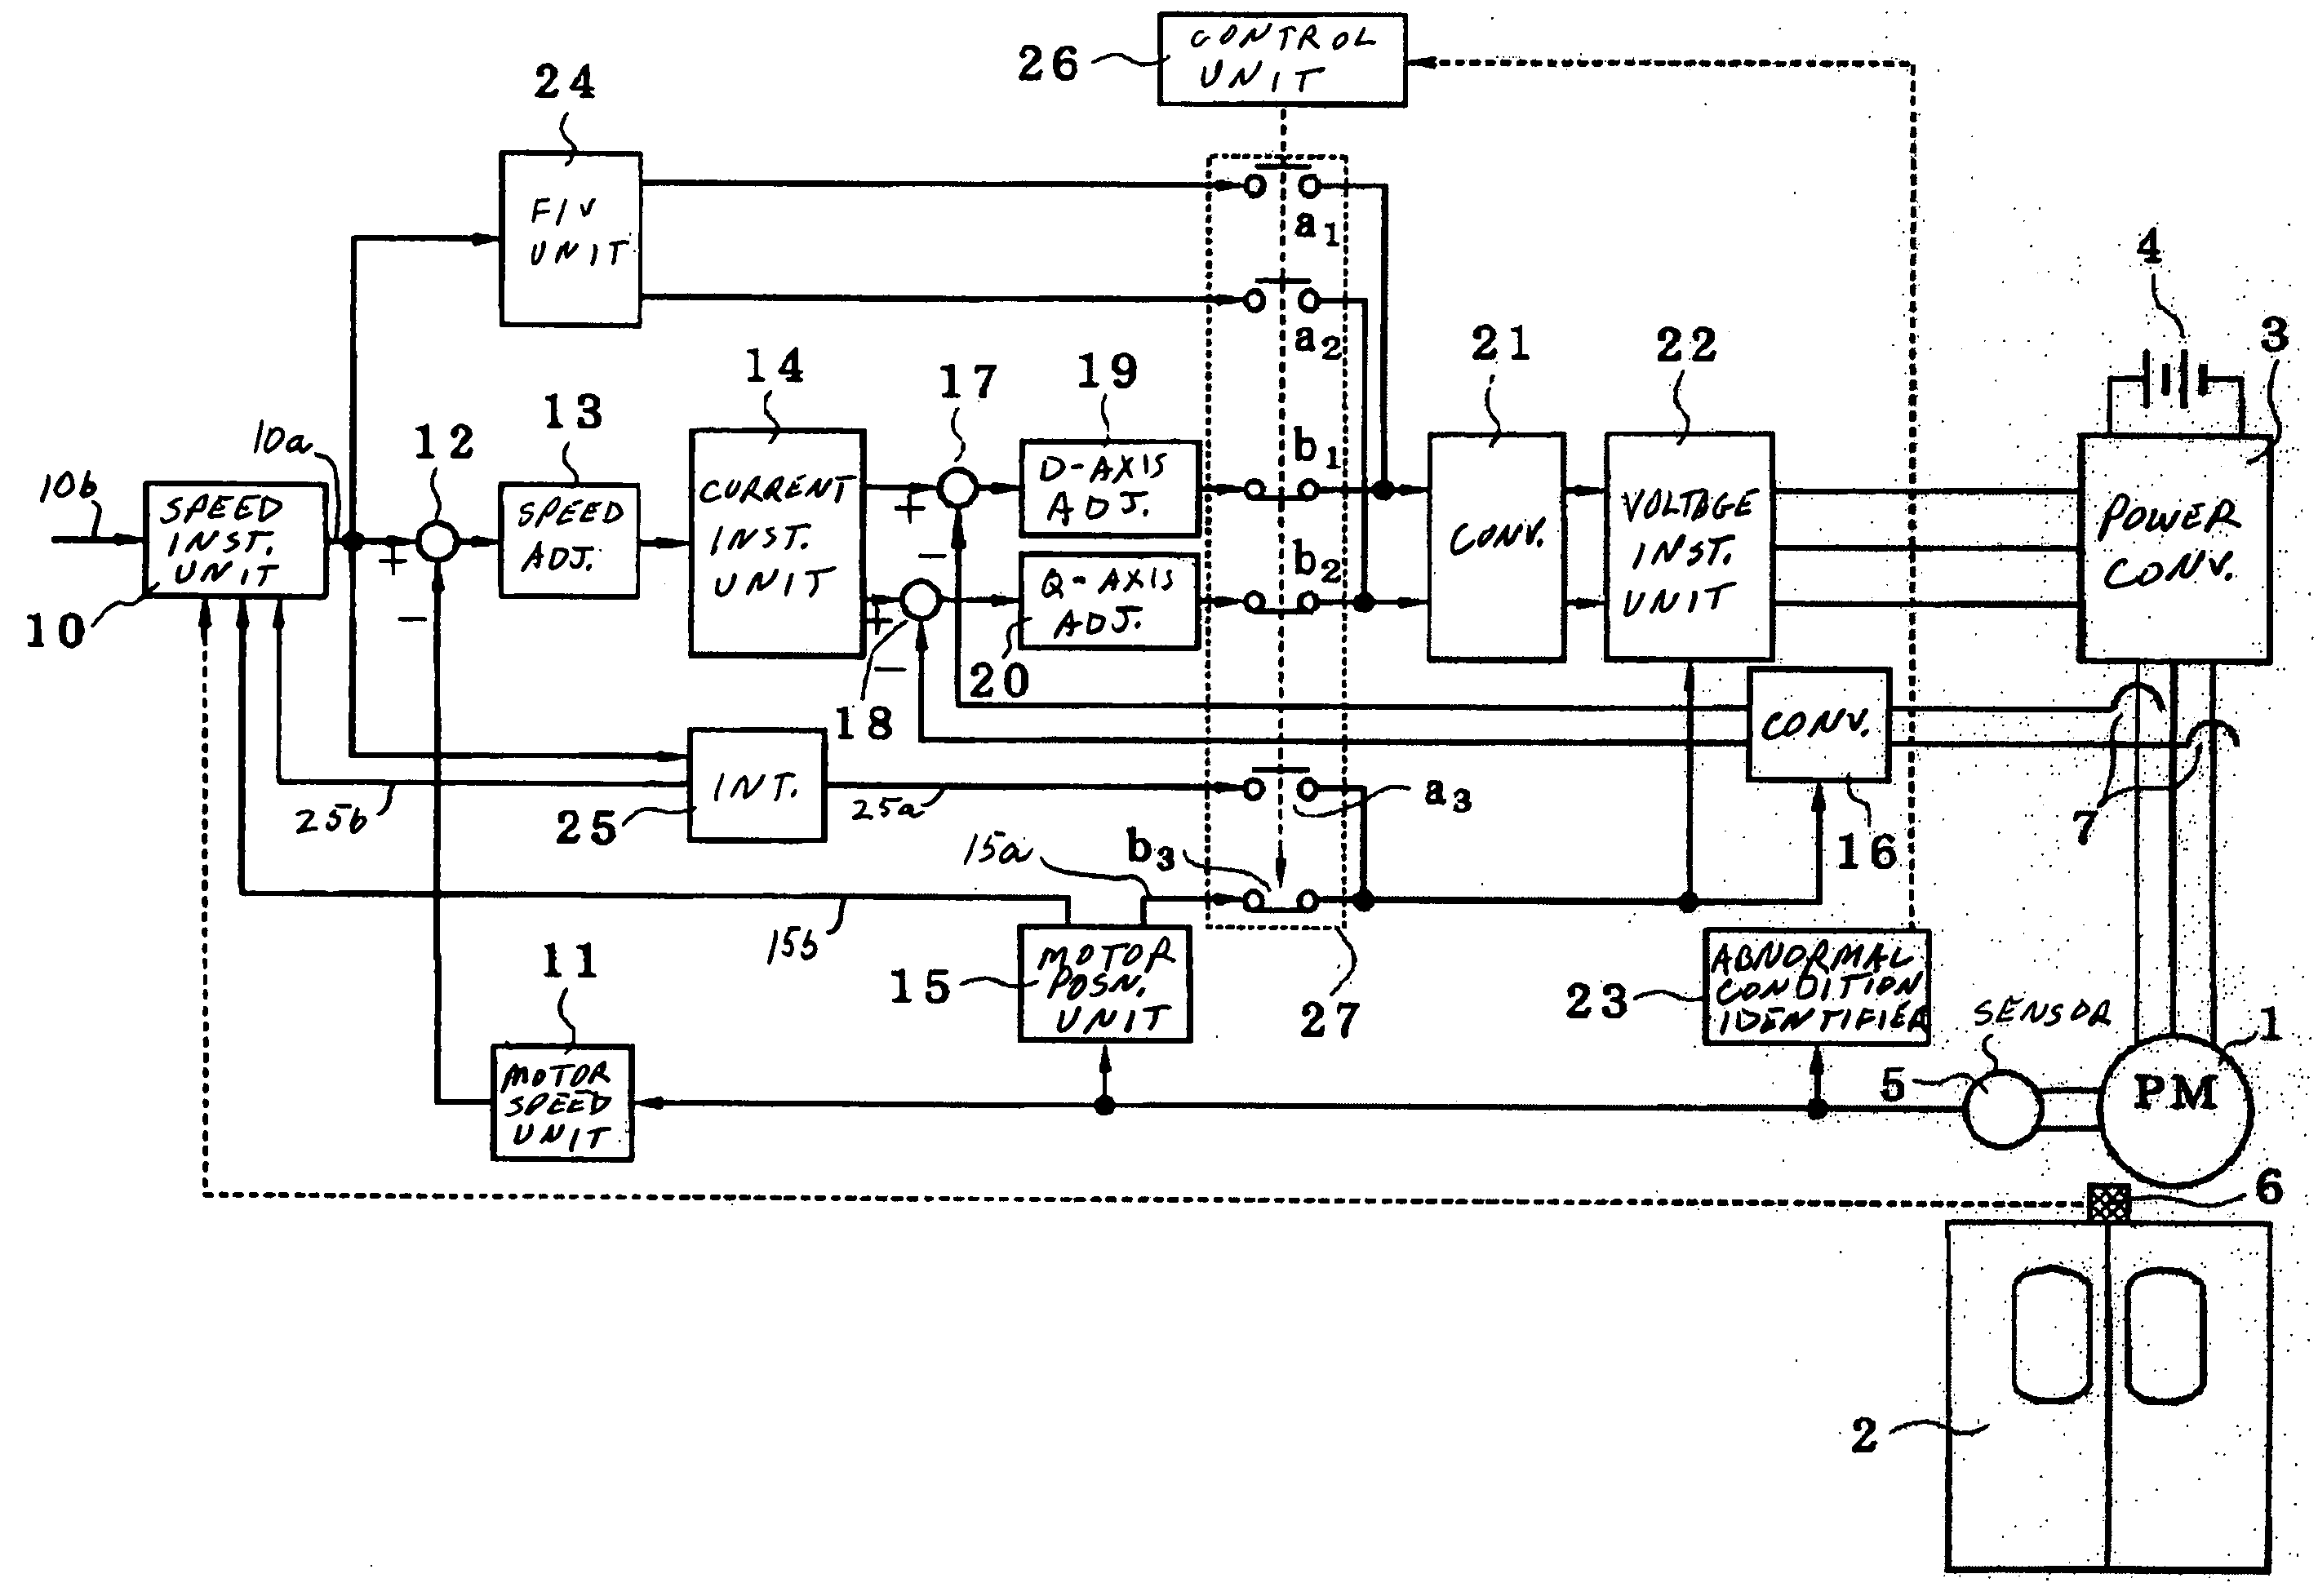 Control unit for controlling a synchronous motor